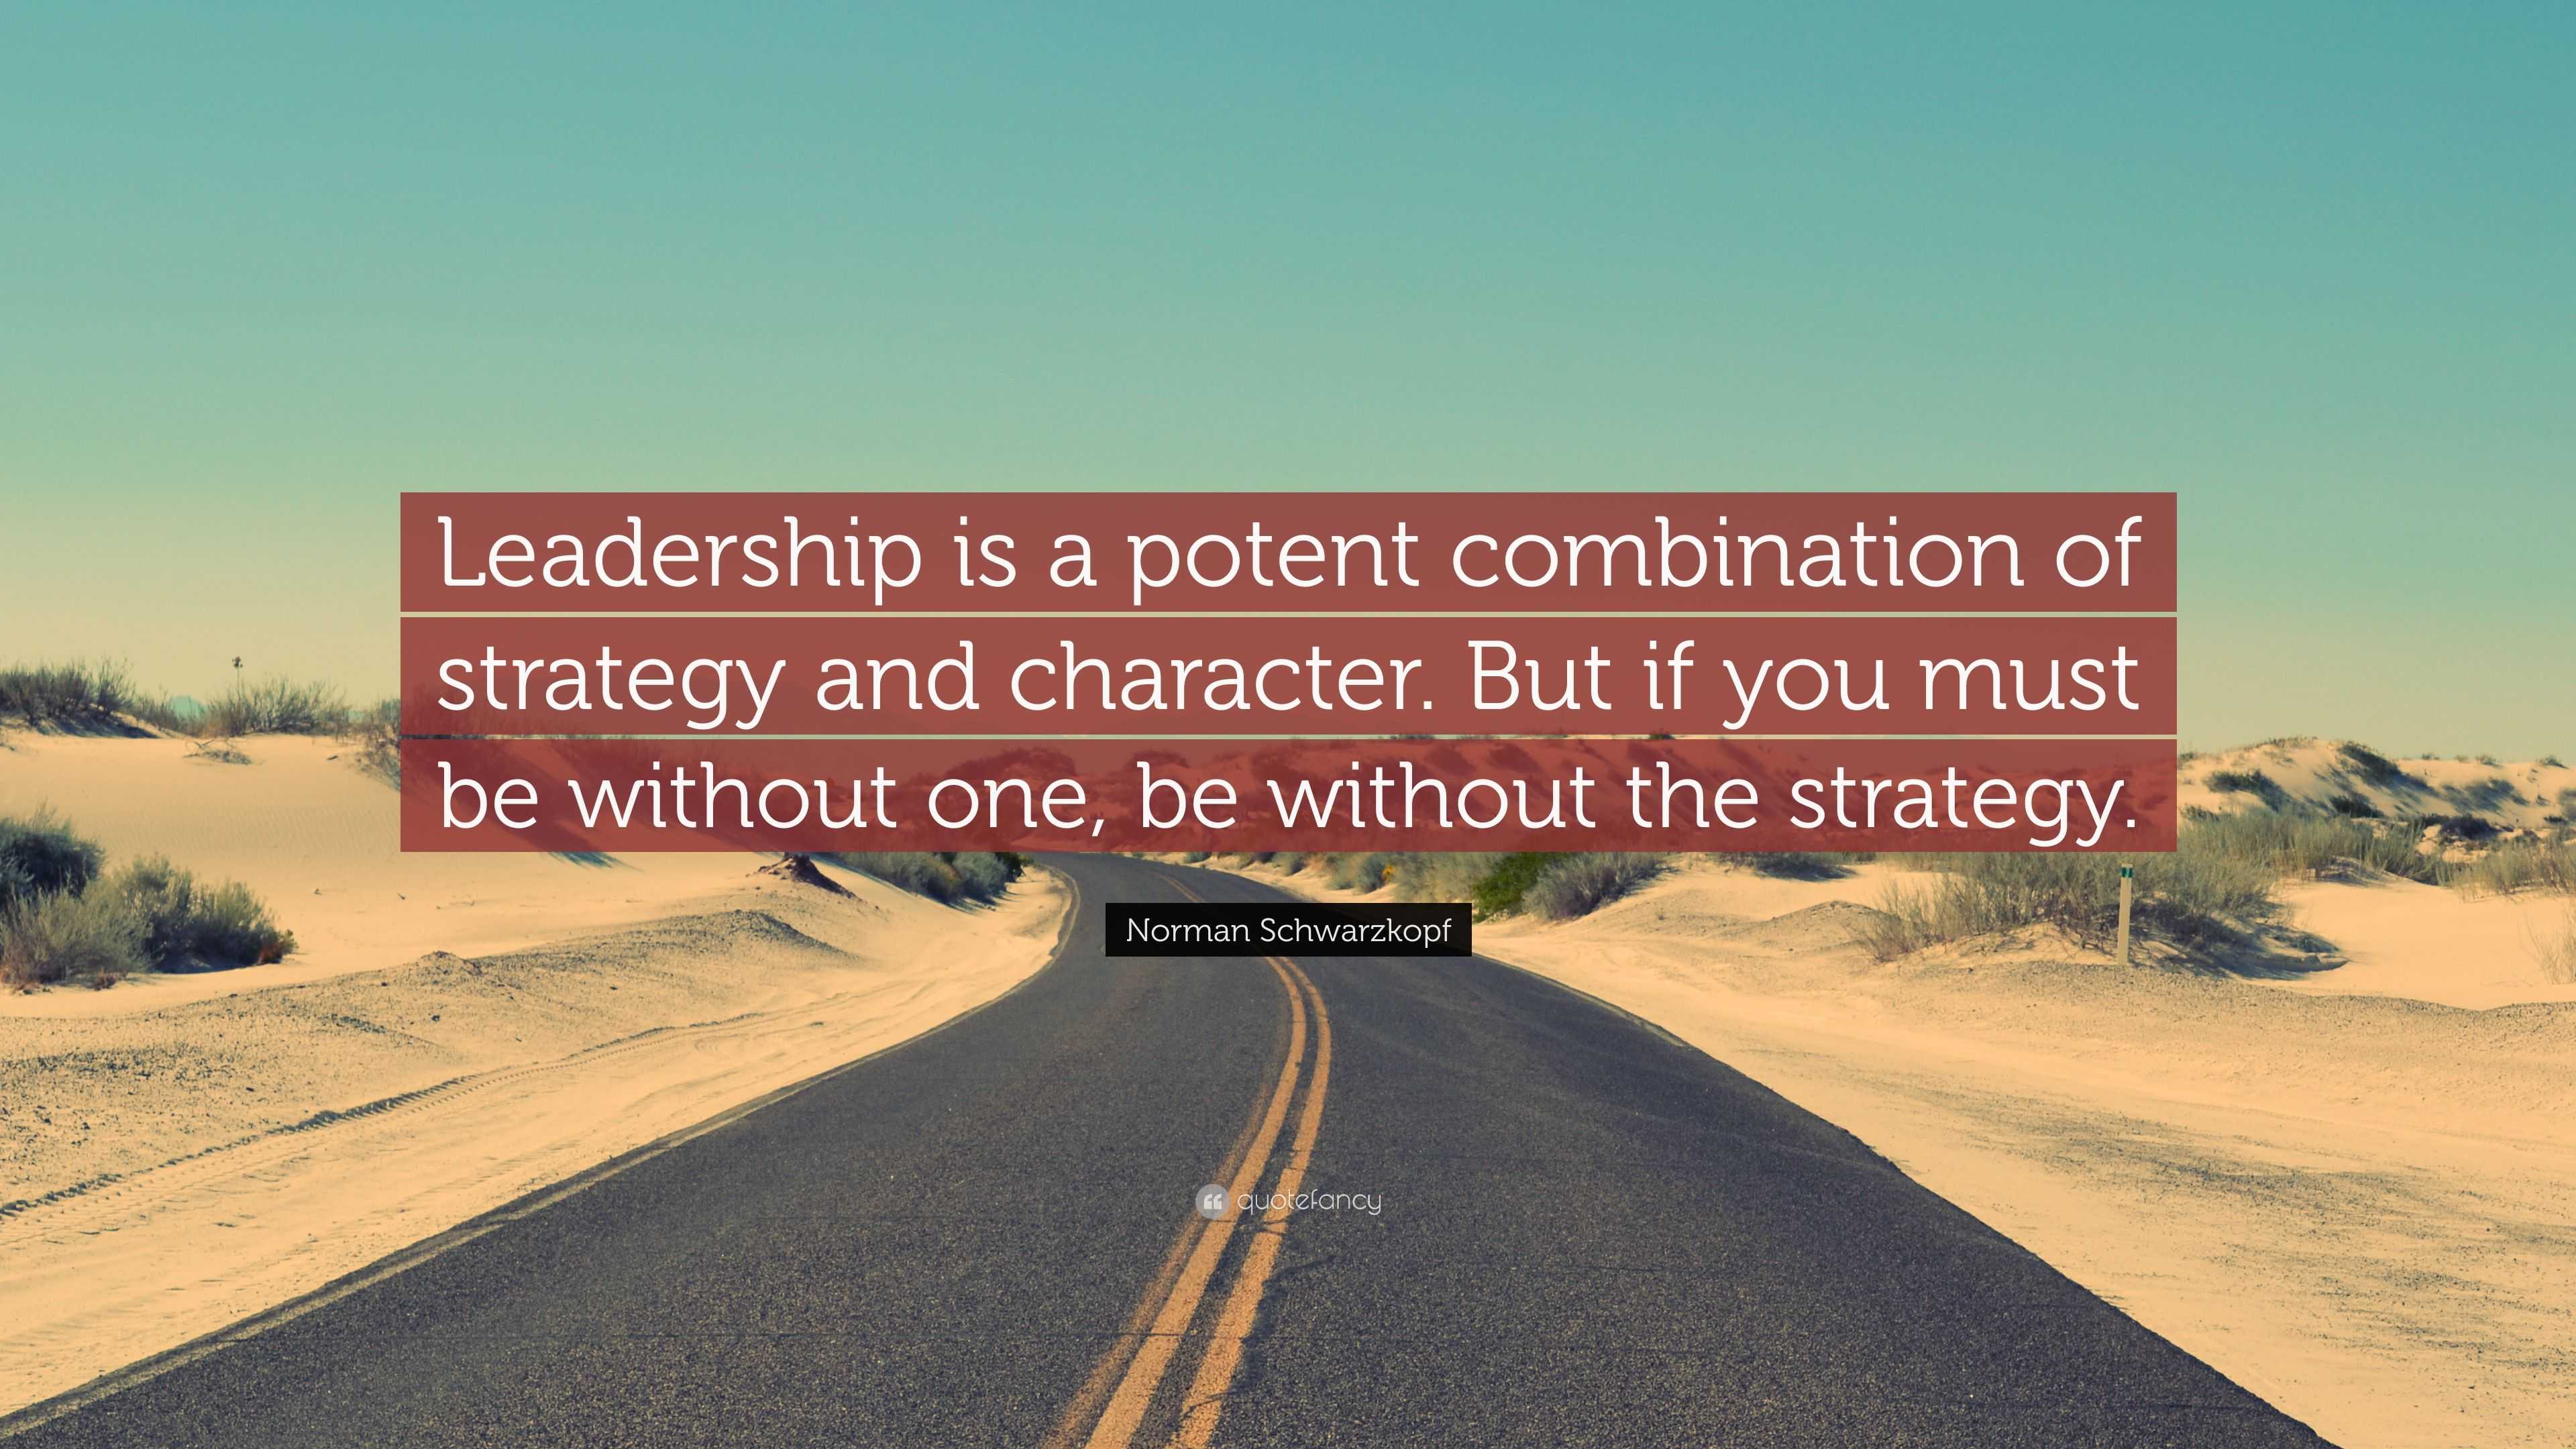 Norman Schwarzkopf Quote: “Leadership is a potent combination of ...